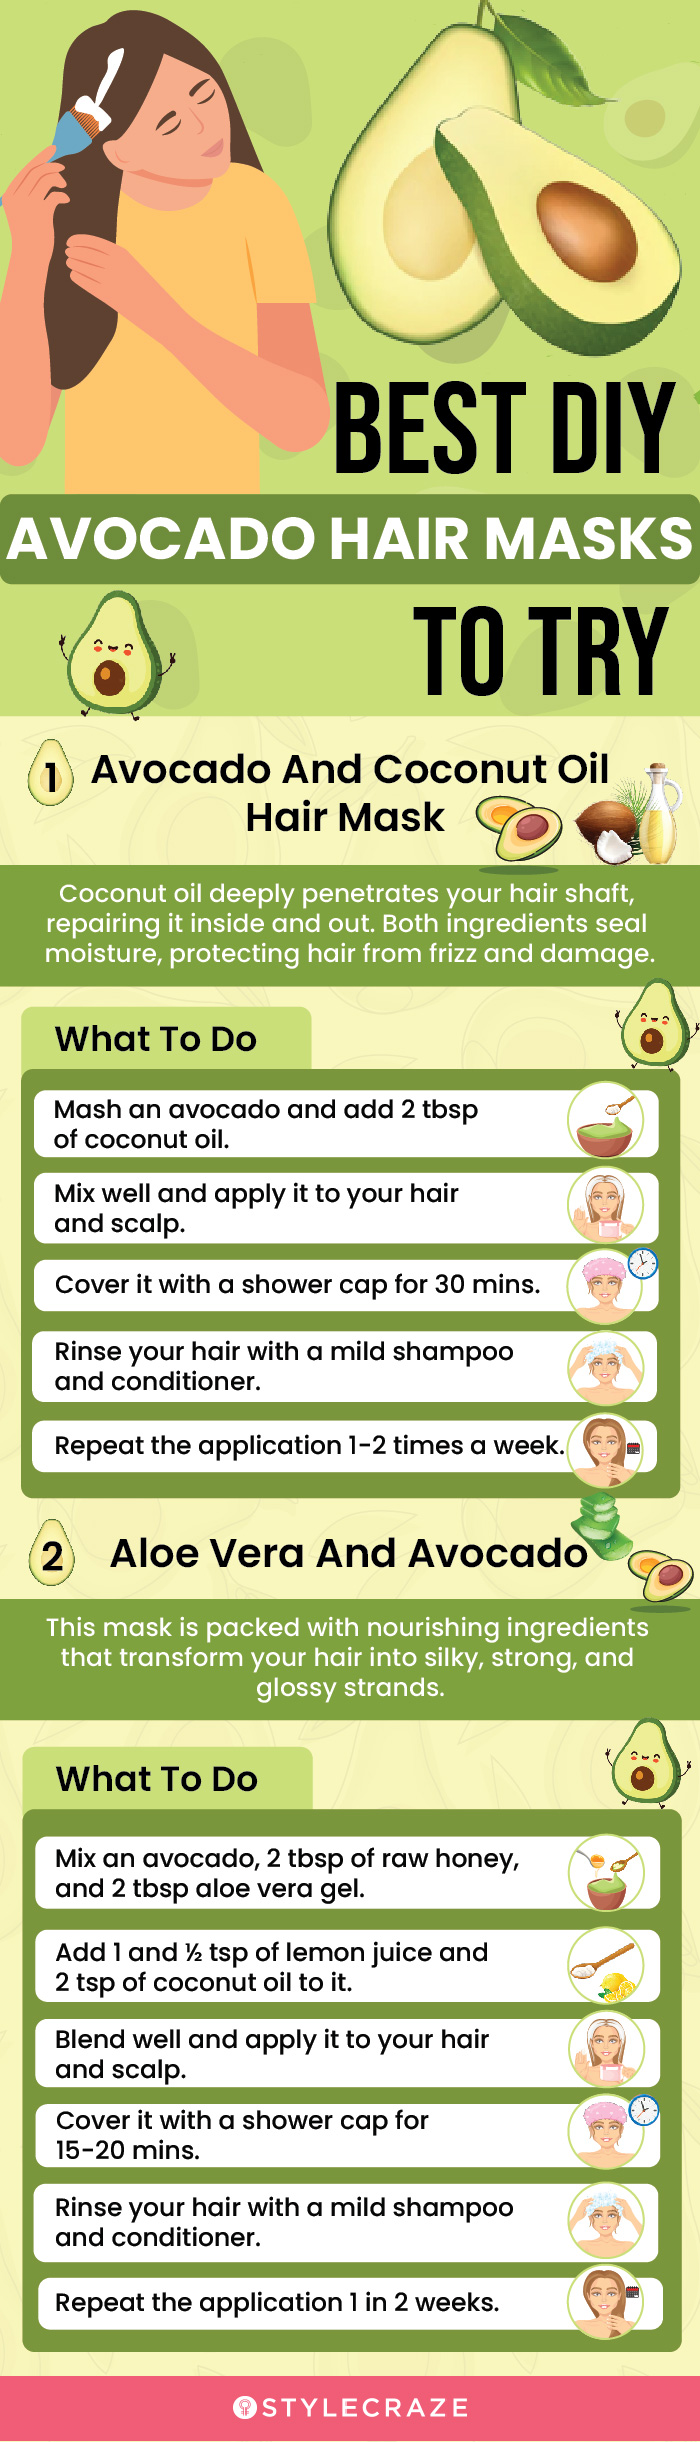 best diy avocado hair masks to try [infographic]